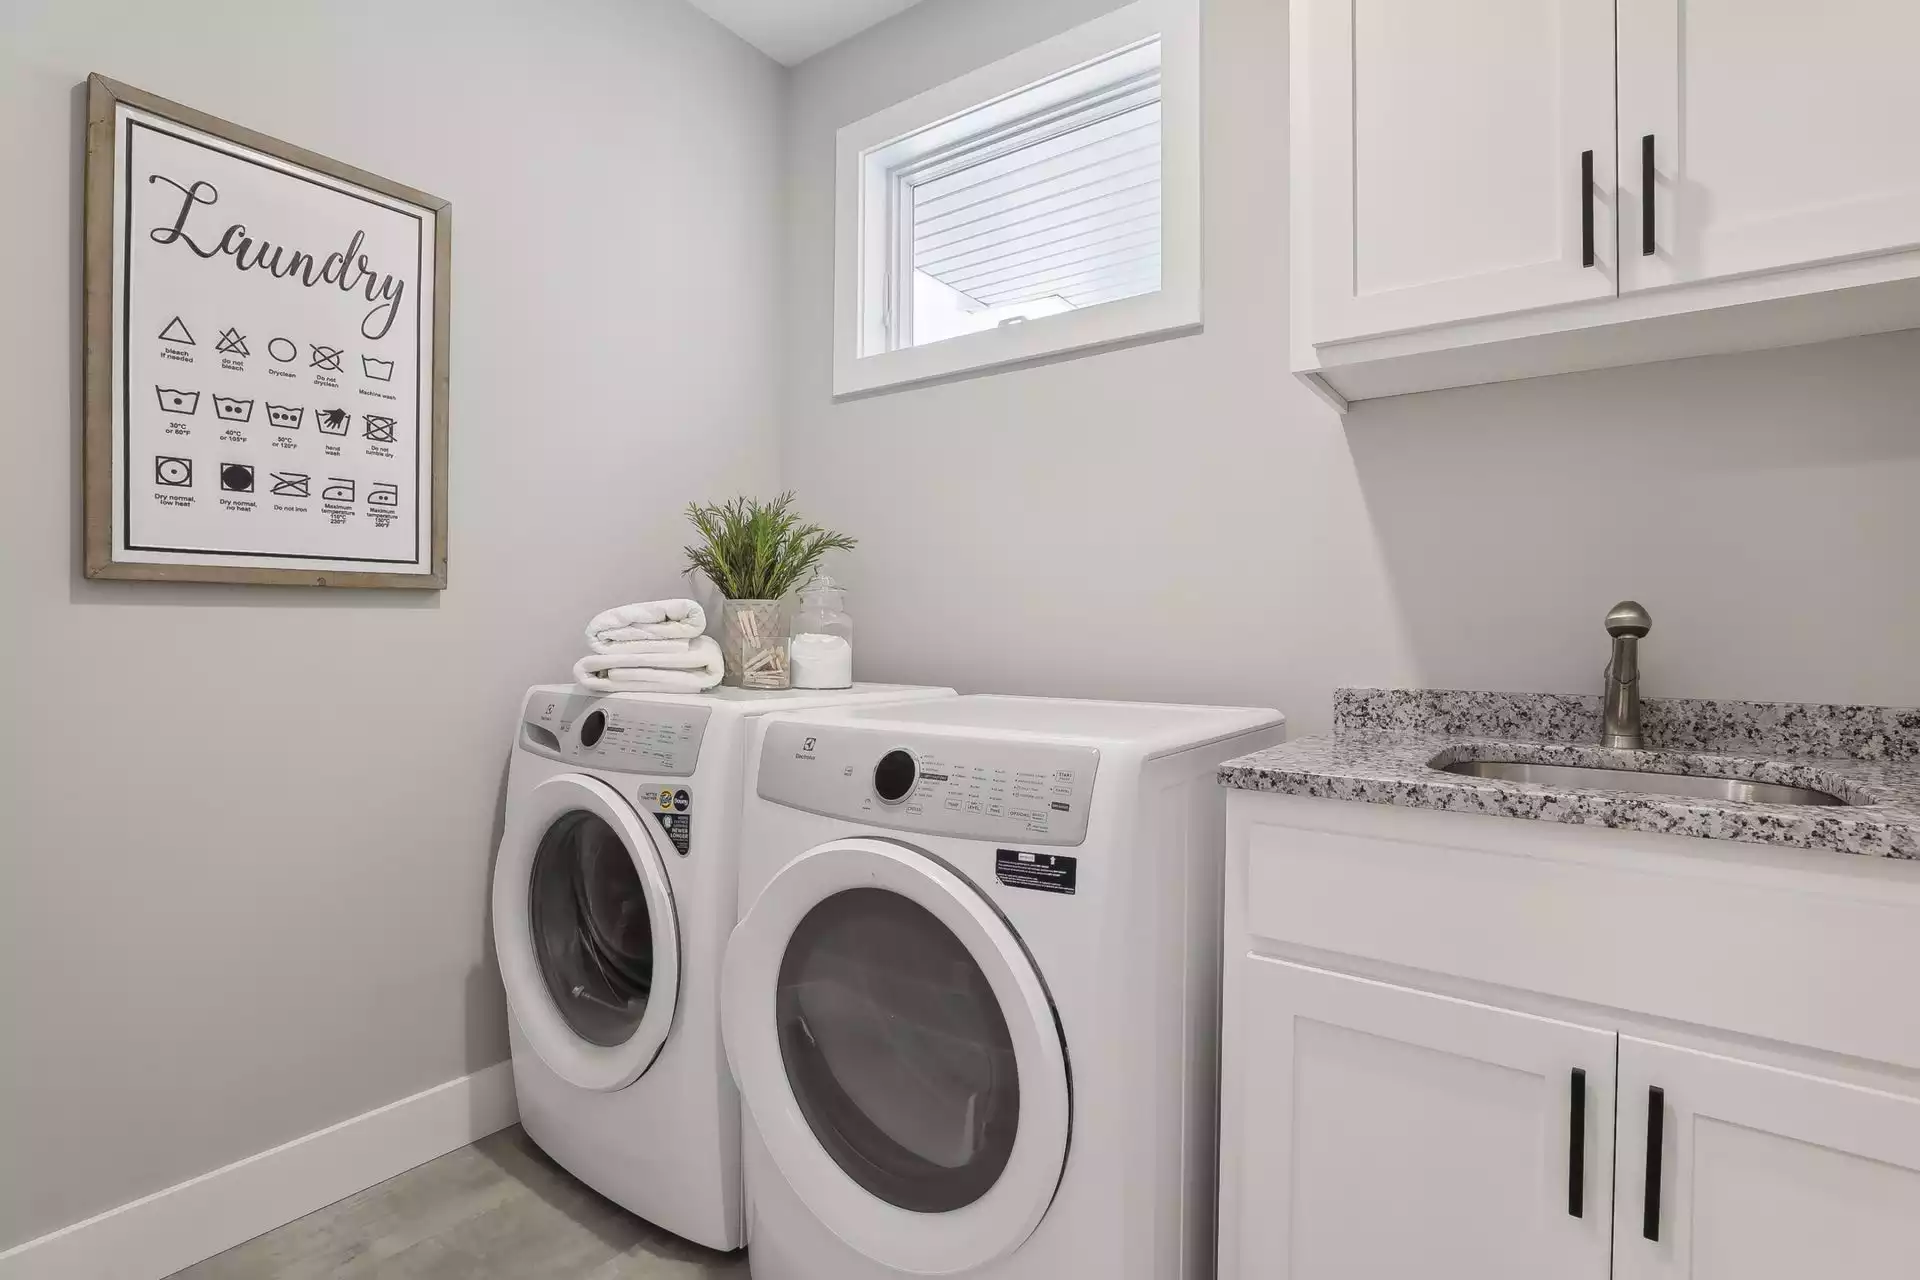 Laundry Room with sink and enameled cabinets